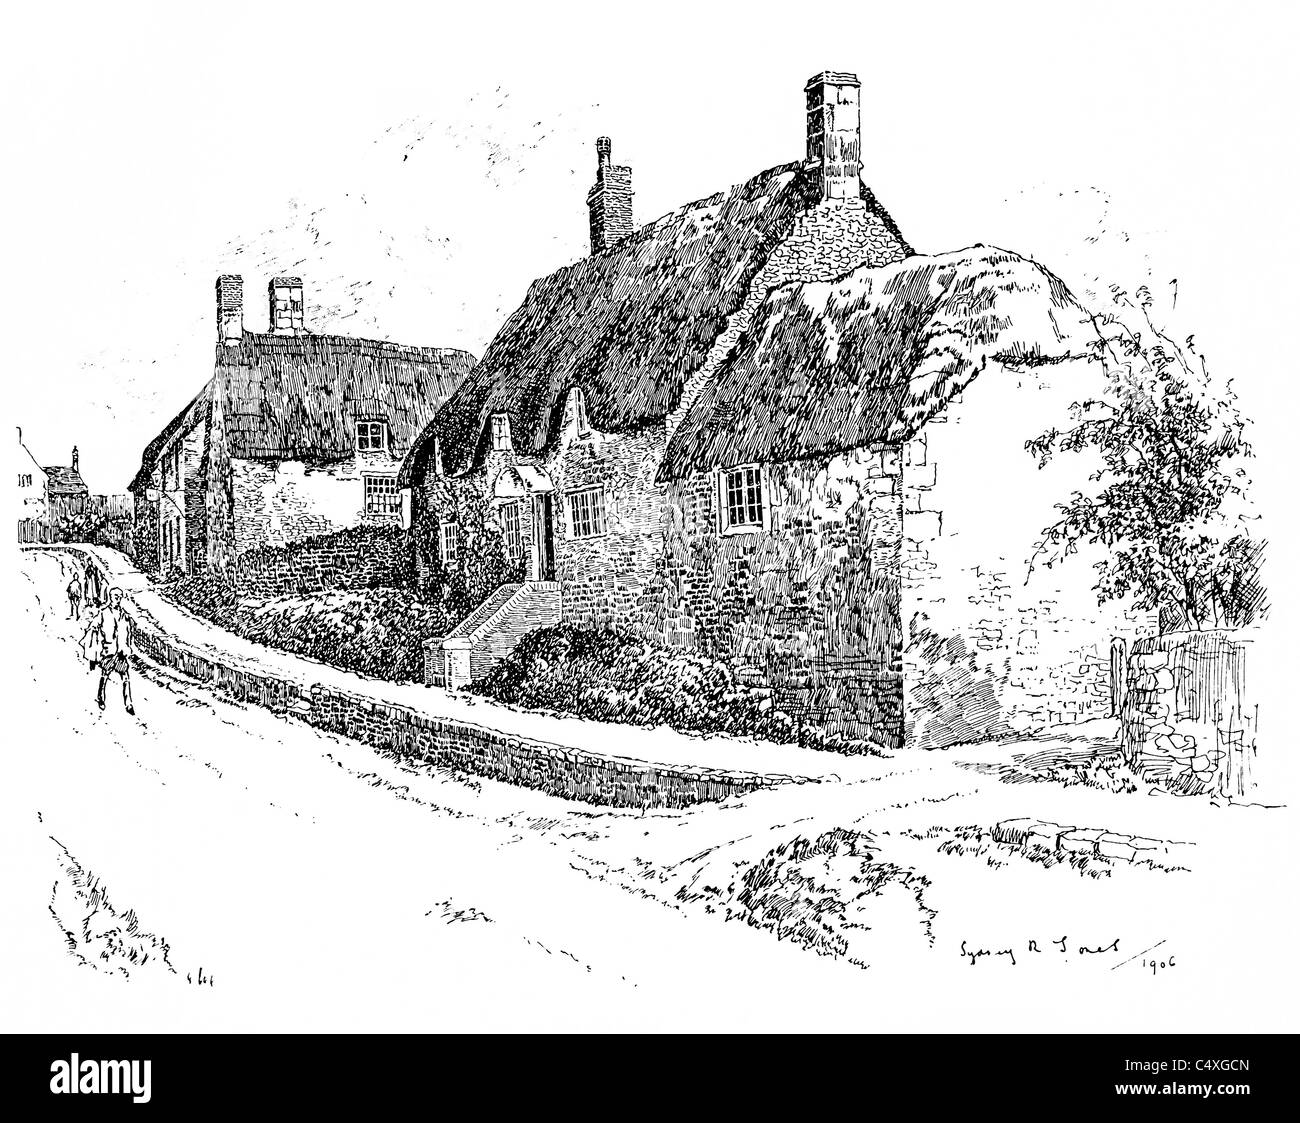 Ebrington, Gloucestershire - pen and ink illustration from 'Old English Country Cottages' by Charles Holme, 1906. Stock Photo